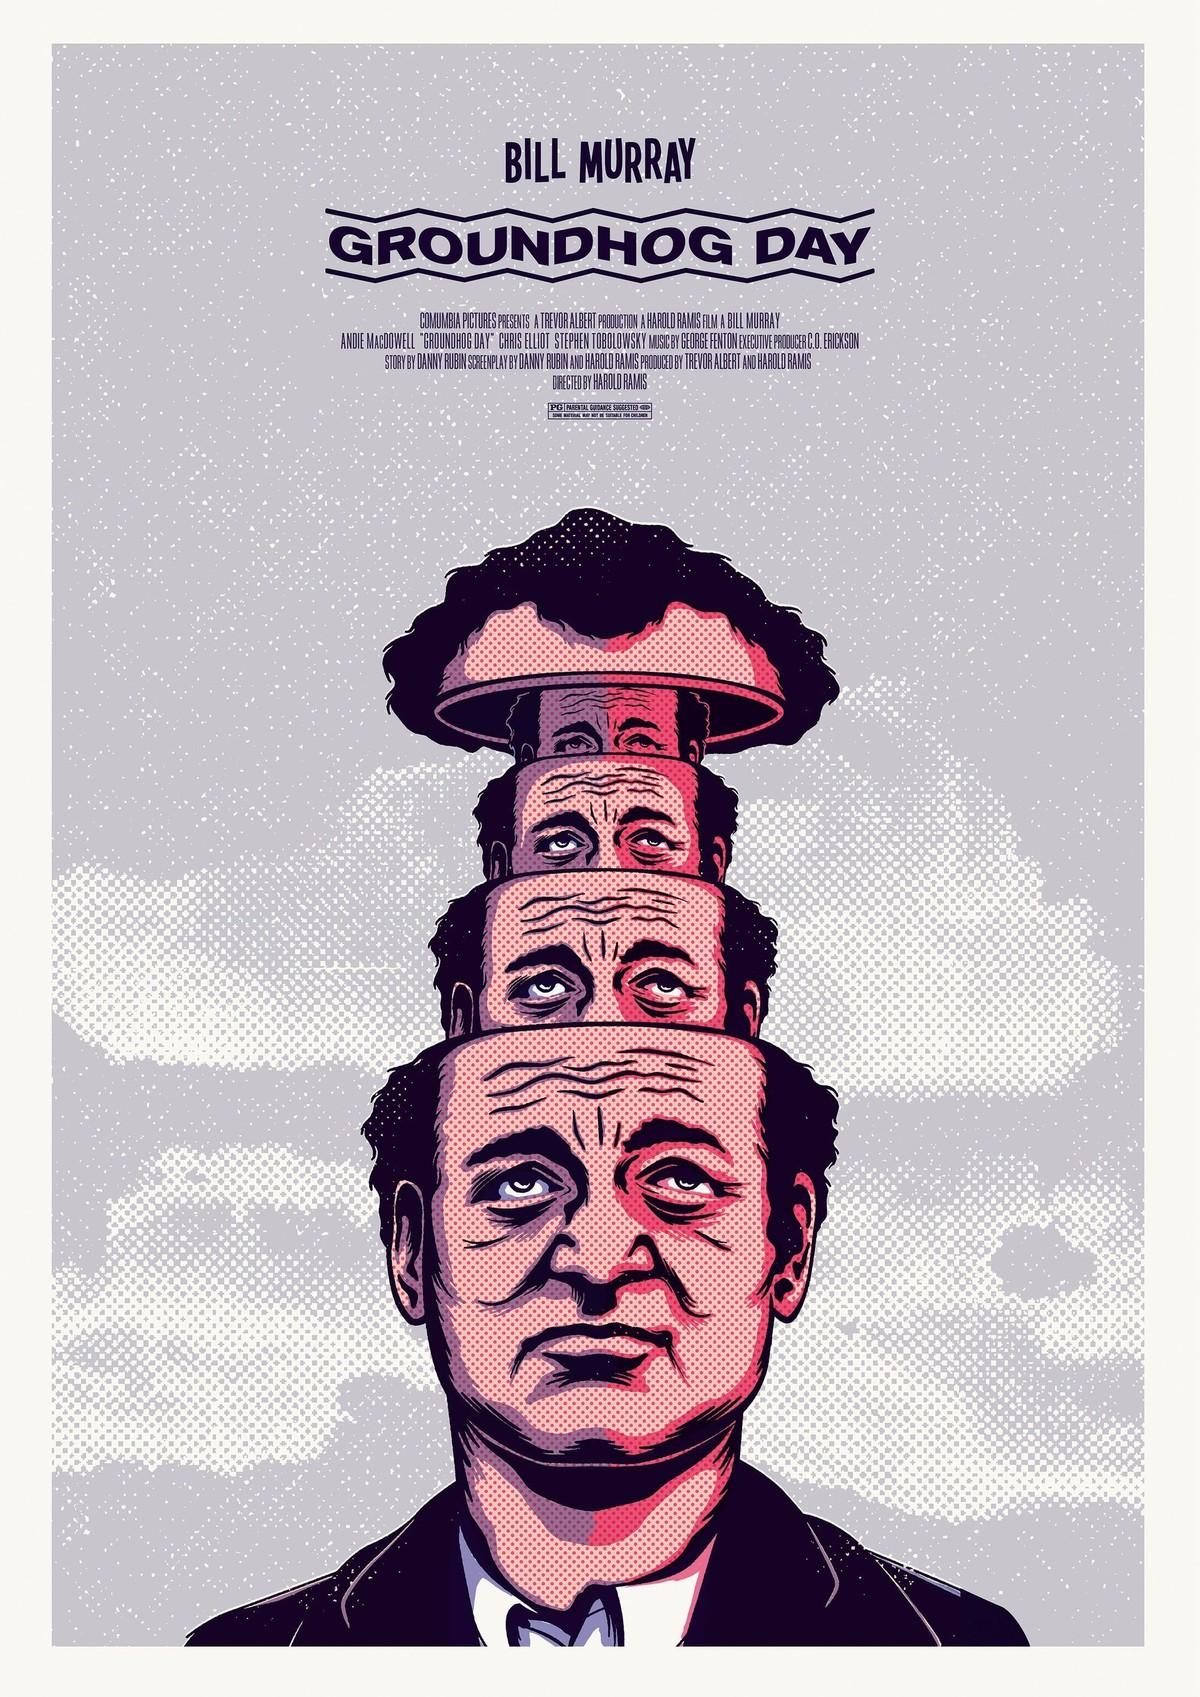 Groundhog Day with Bill Murray